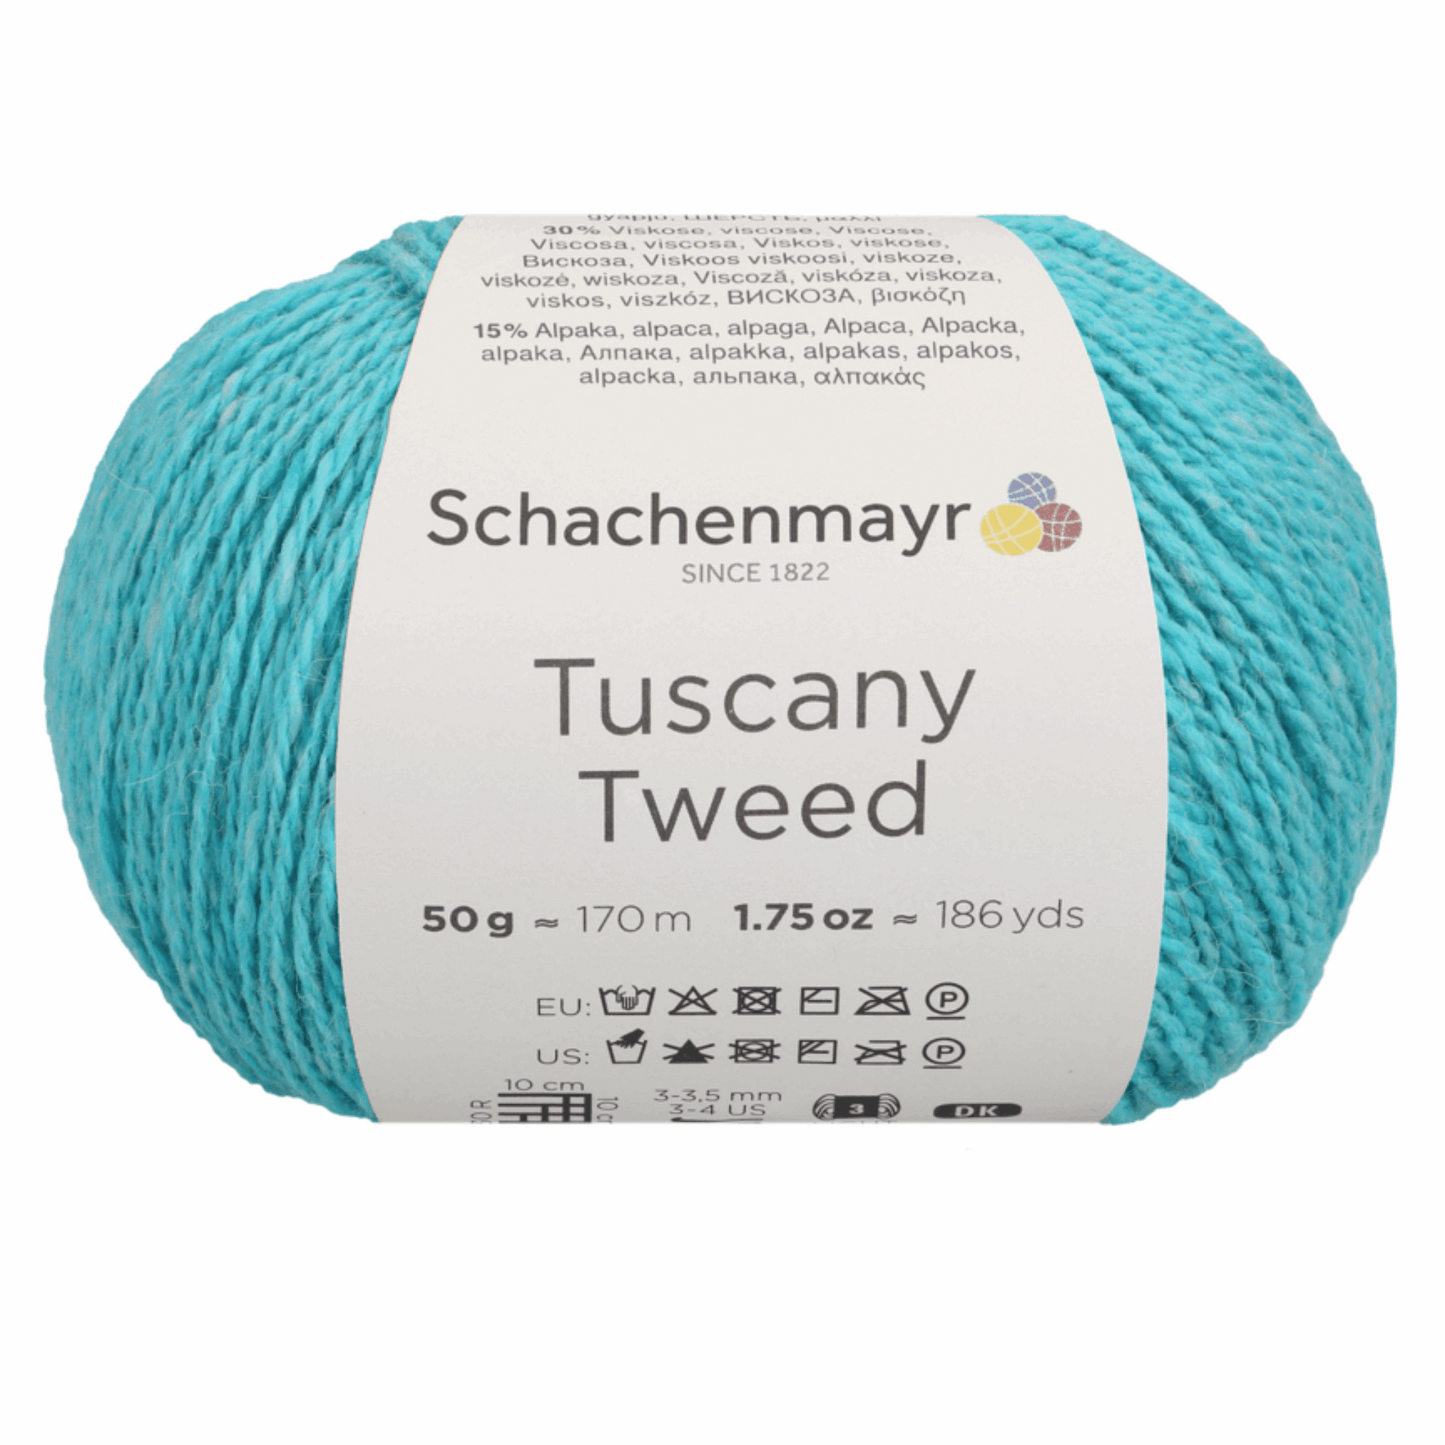 Schachenmayr Tuscany Tweed, 97002, Farbe türkis 68